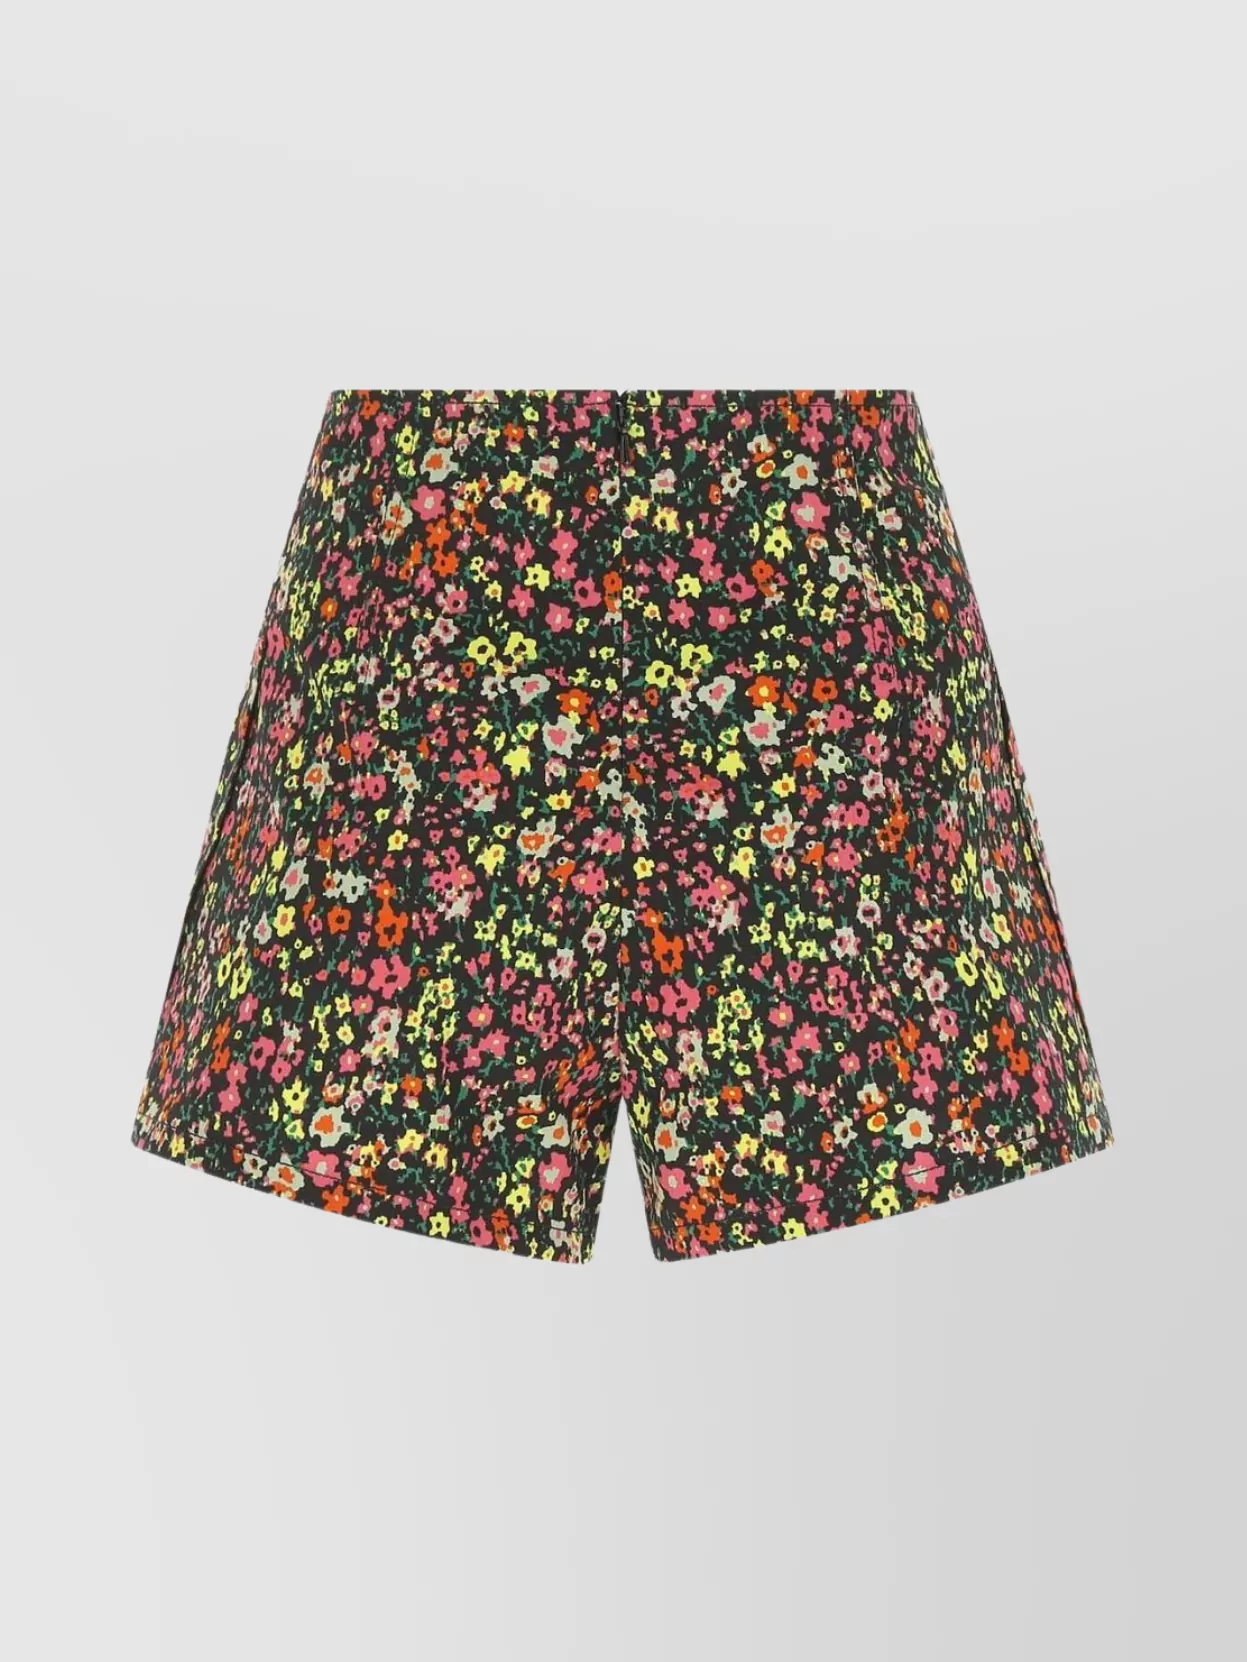 Philosophy Cotton Shorts With Floral Print And Belt Loops In Multi